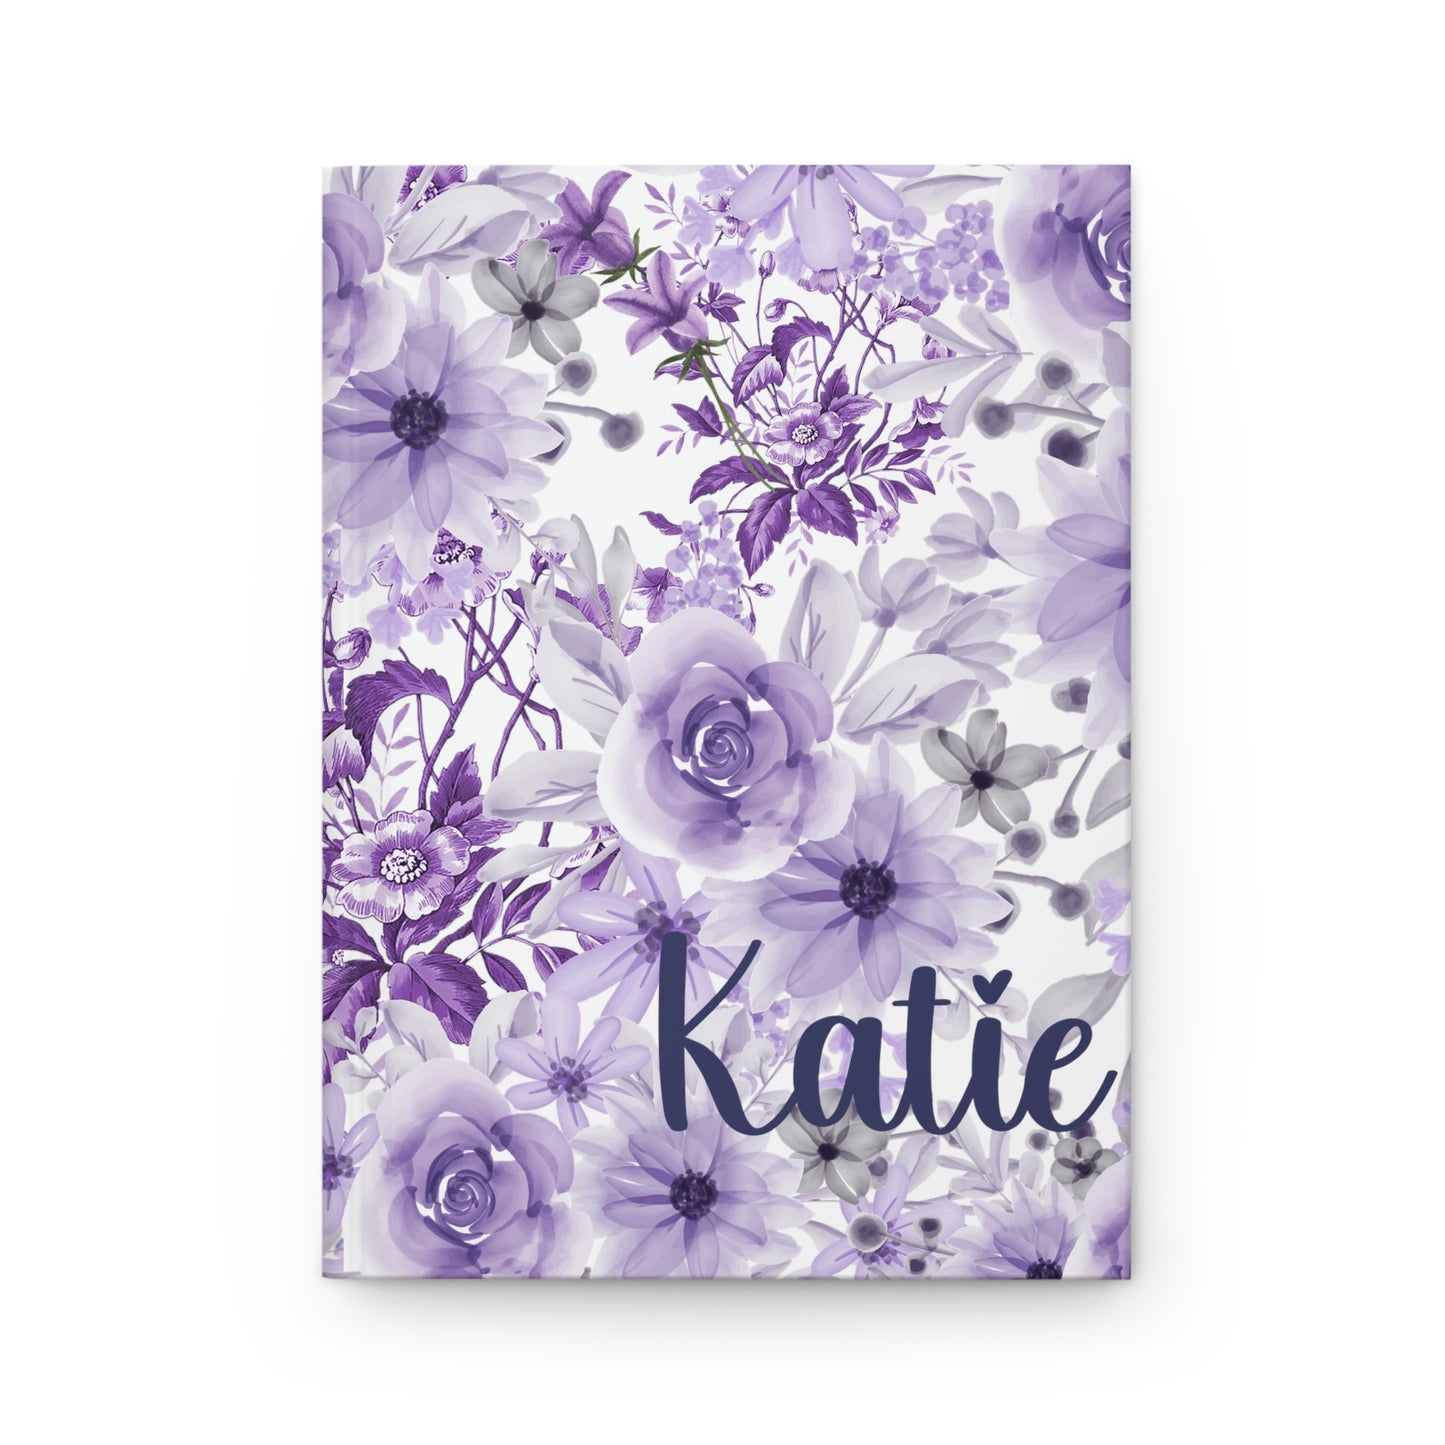 personalized purple flower journal with purple roses and grey flowers. perfect for bridesmaid gifts, girls birthday gift, mothers day gifts or for spring or summer